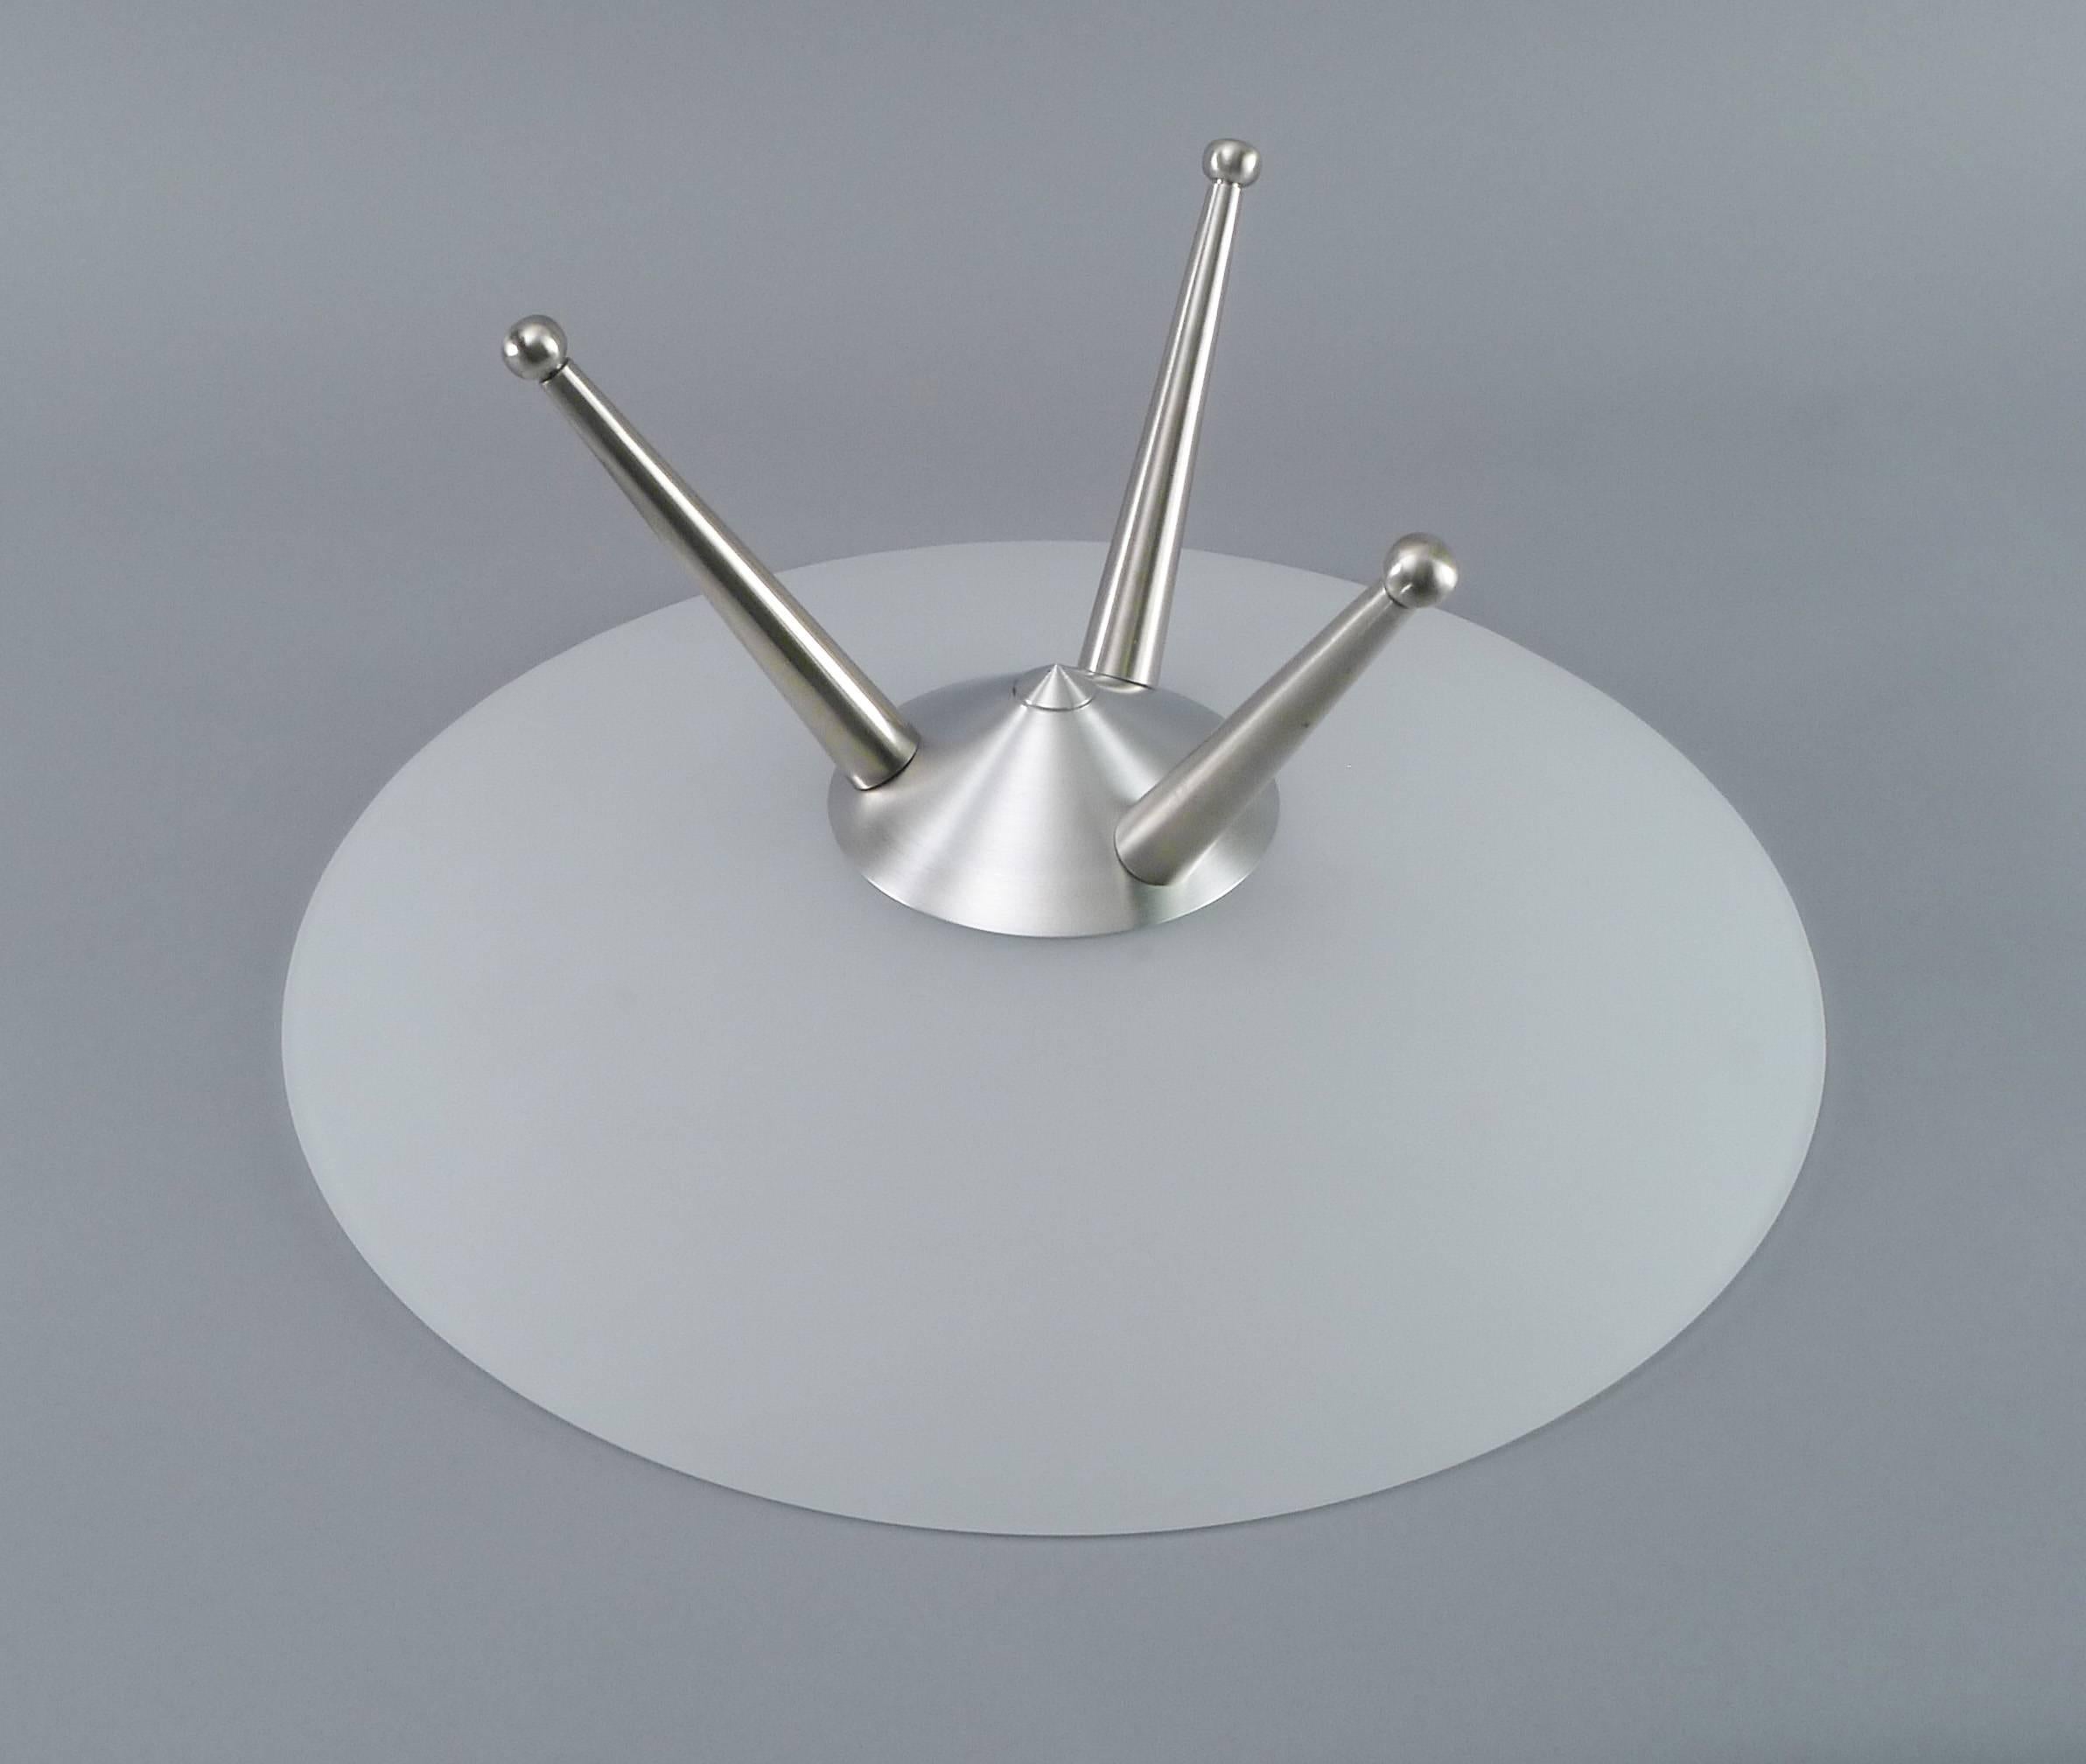 Shallow glass serving bowl with satin aluminum legs in Memphis style. (3) Solid machined alumiunm legs.